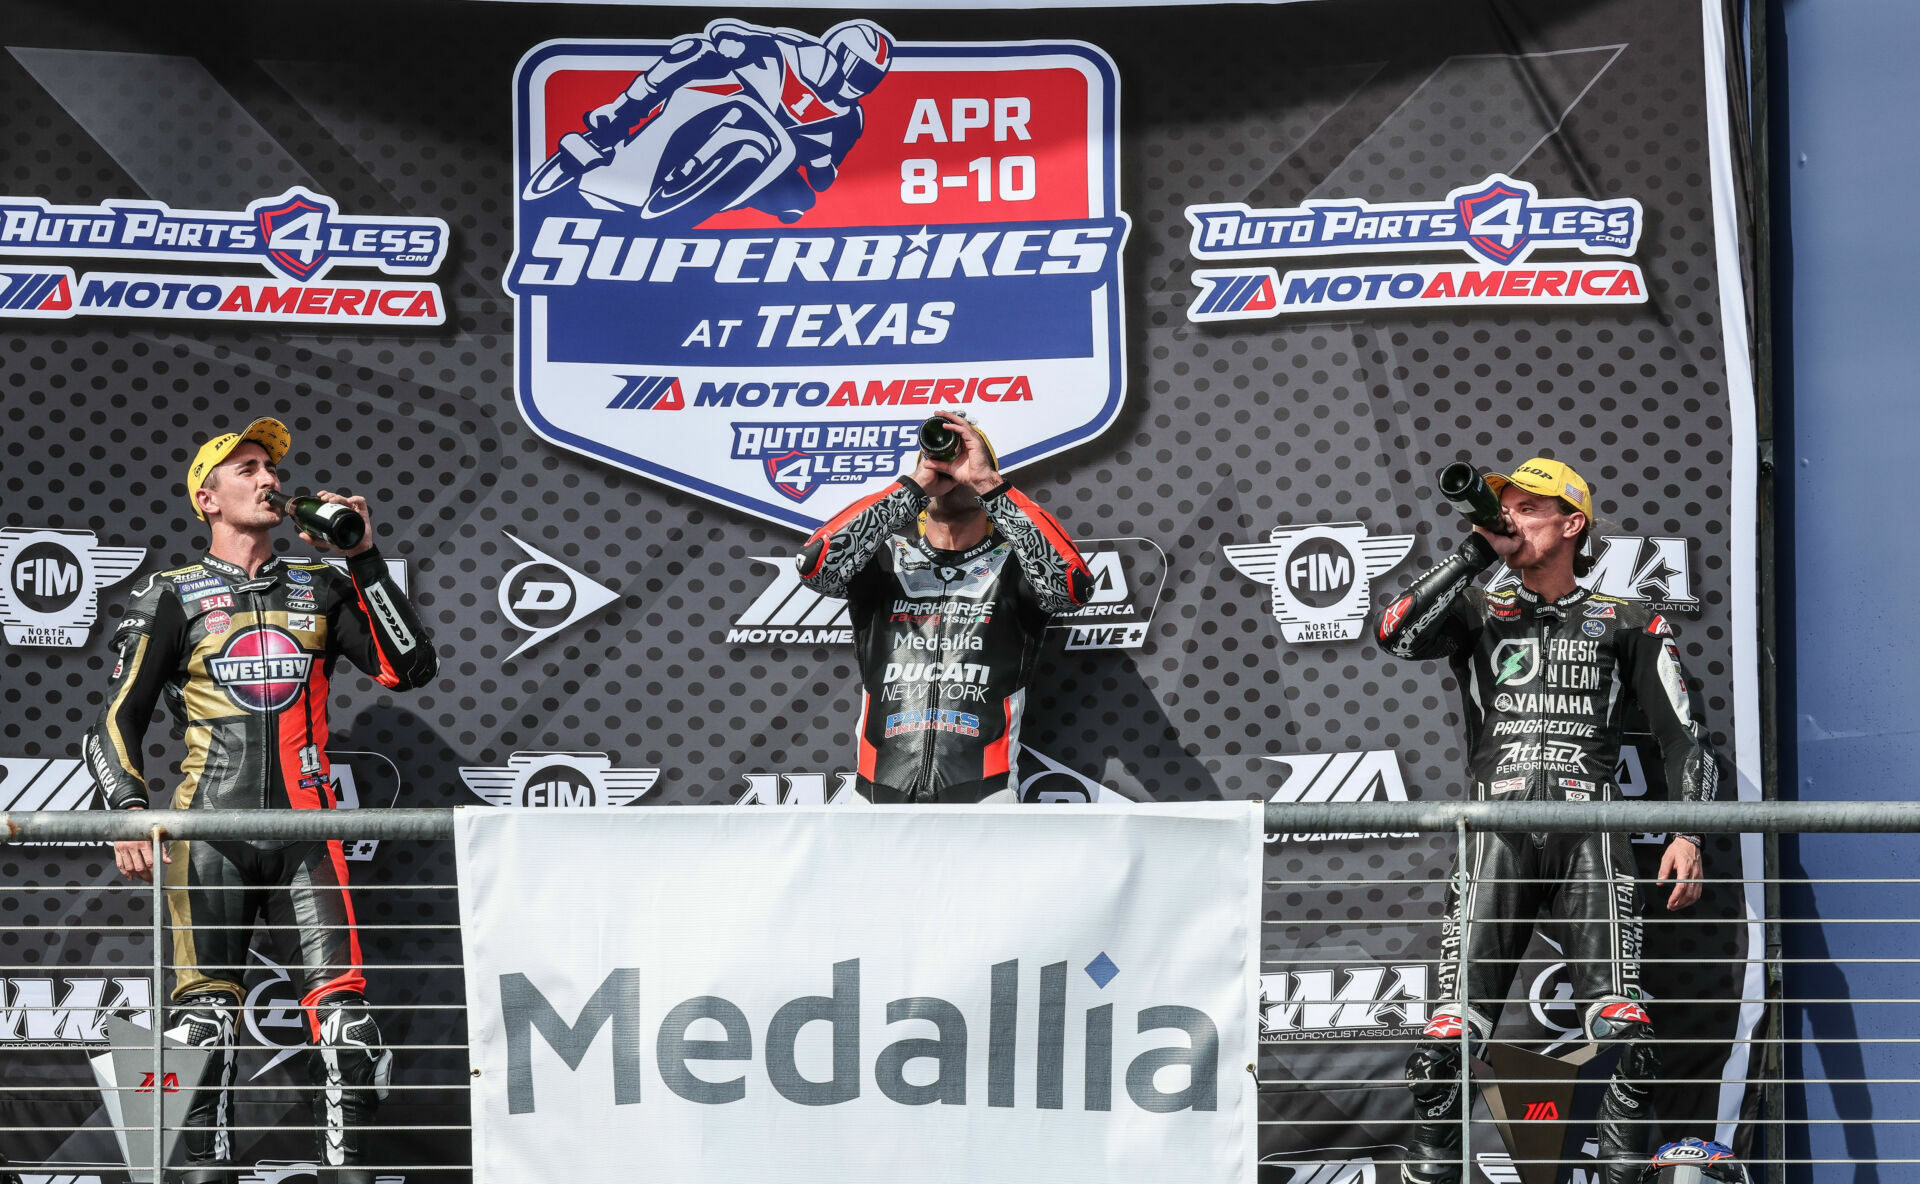 MotoAmerica Medallia Superbike Race Two winner Danilo Petrucci (center), runner-up Mathew Scholtz (left), and third-place finisher Jake Gagne (right) on the podium at COTA with Auto Parts 4 Less logos displayed prominently on the podium backdrop. Photo by Brian J. Nelson.